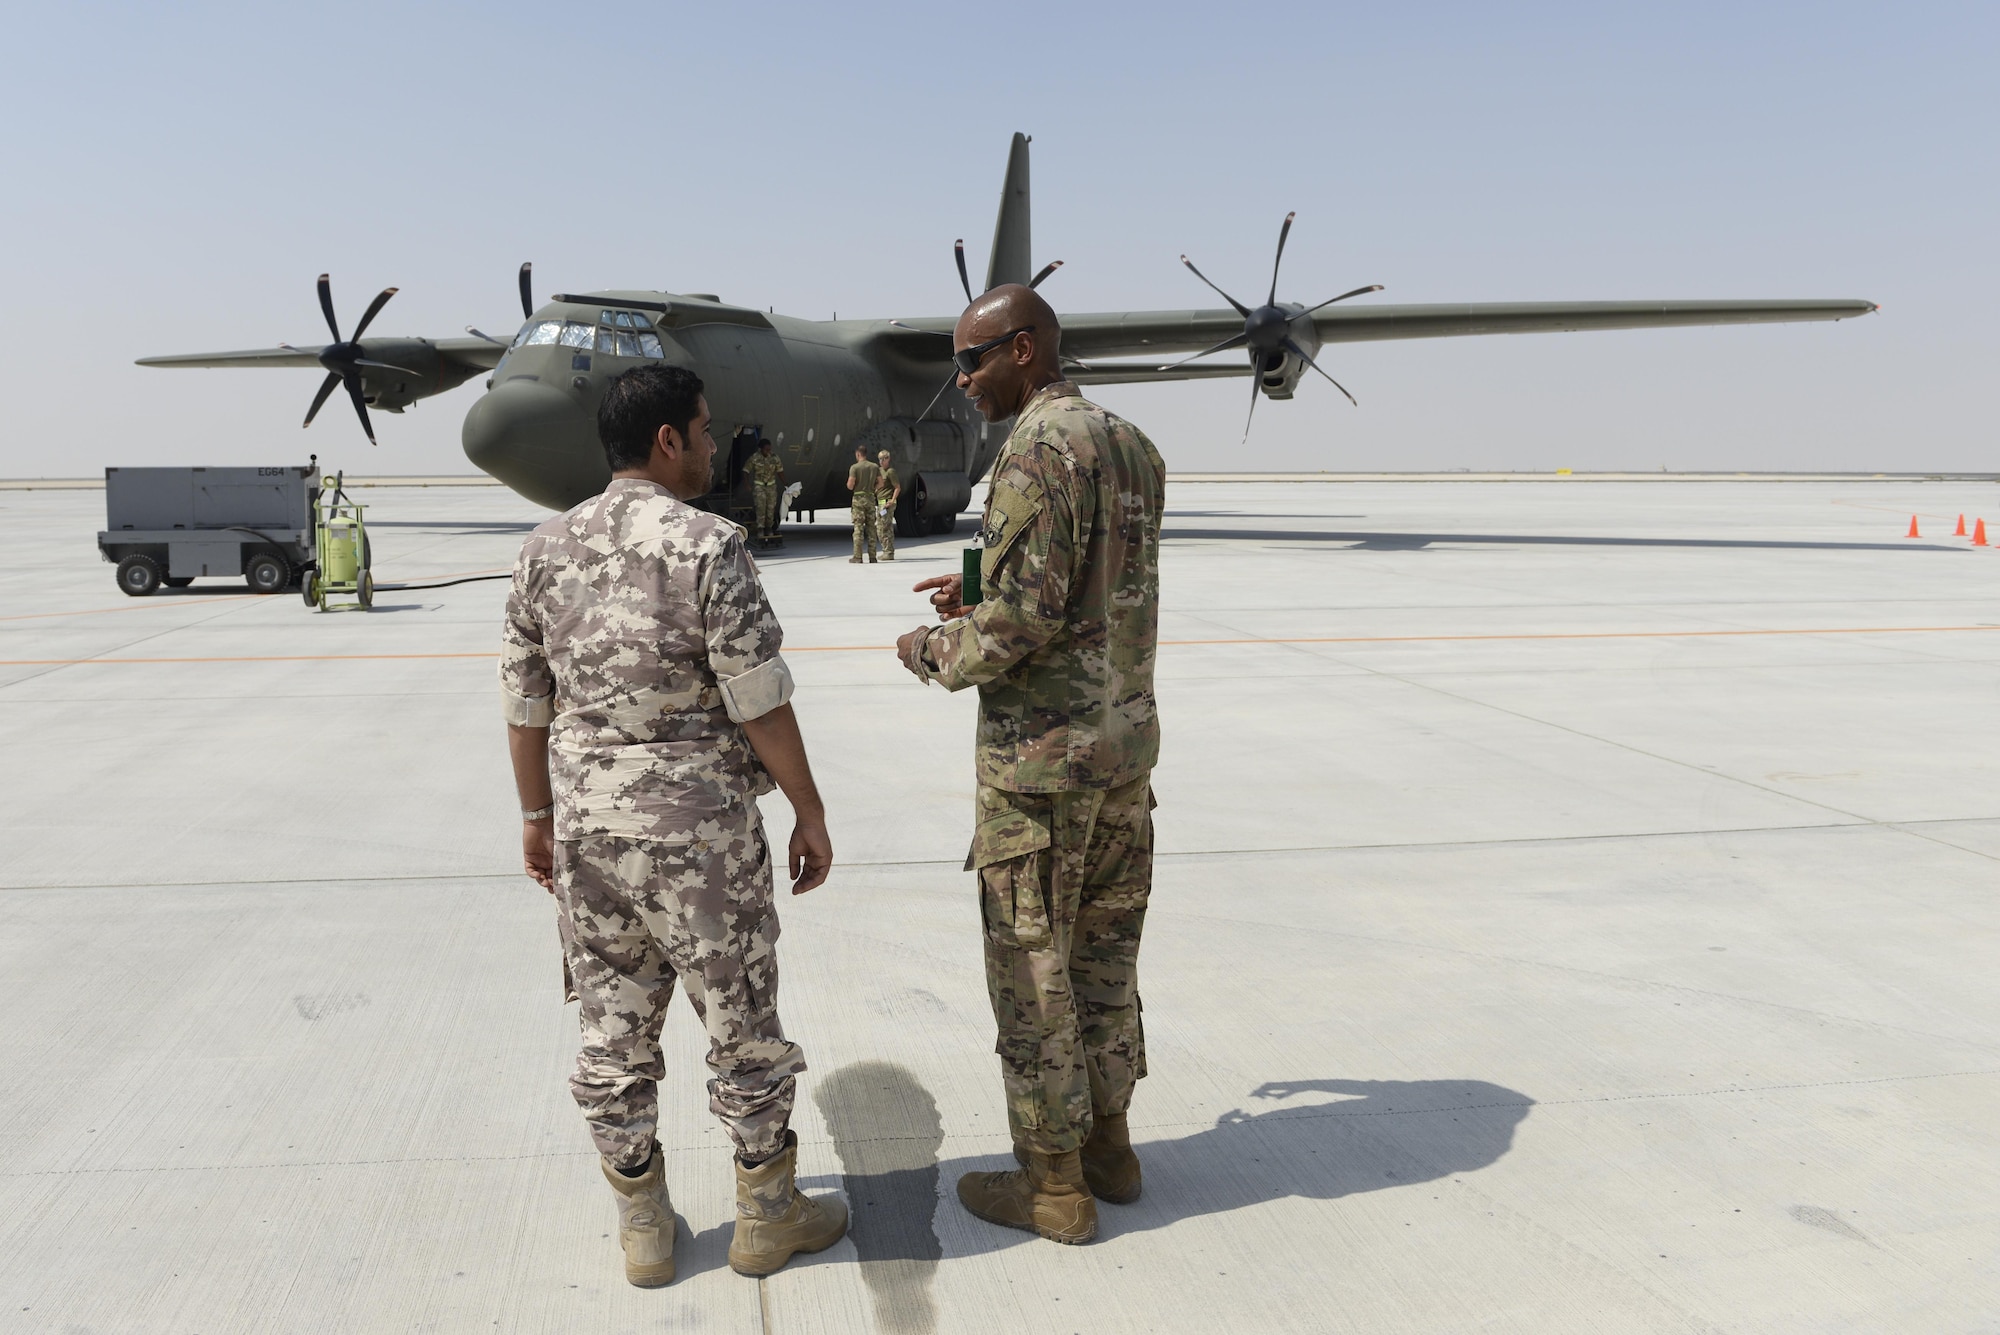 U.S. Air Force Chief Master Sgt. Jerry Williams, command chief assigned to the 379th Air Expeditionary Wing, visits with a member of the Qatar Emiri Air Force as a Royal Air Force C-130J Hercules is off-loaded on the runway at Al Udeid, Air Base, Qatar, Oct. 3, 2017.